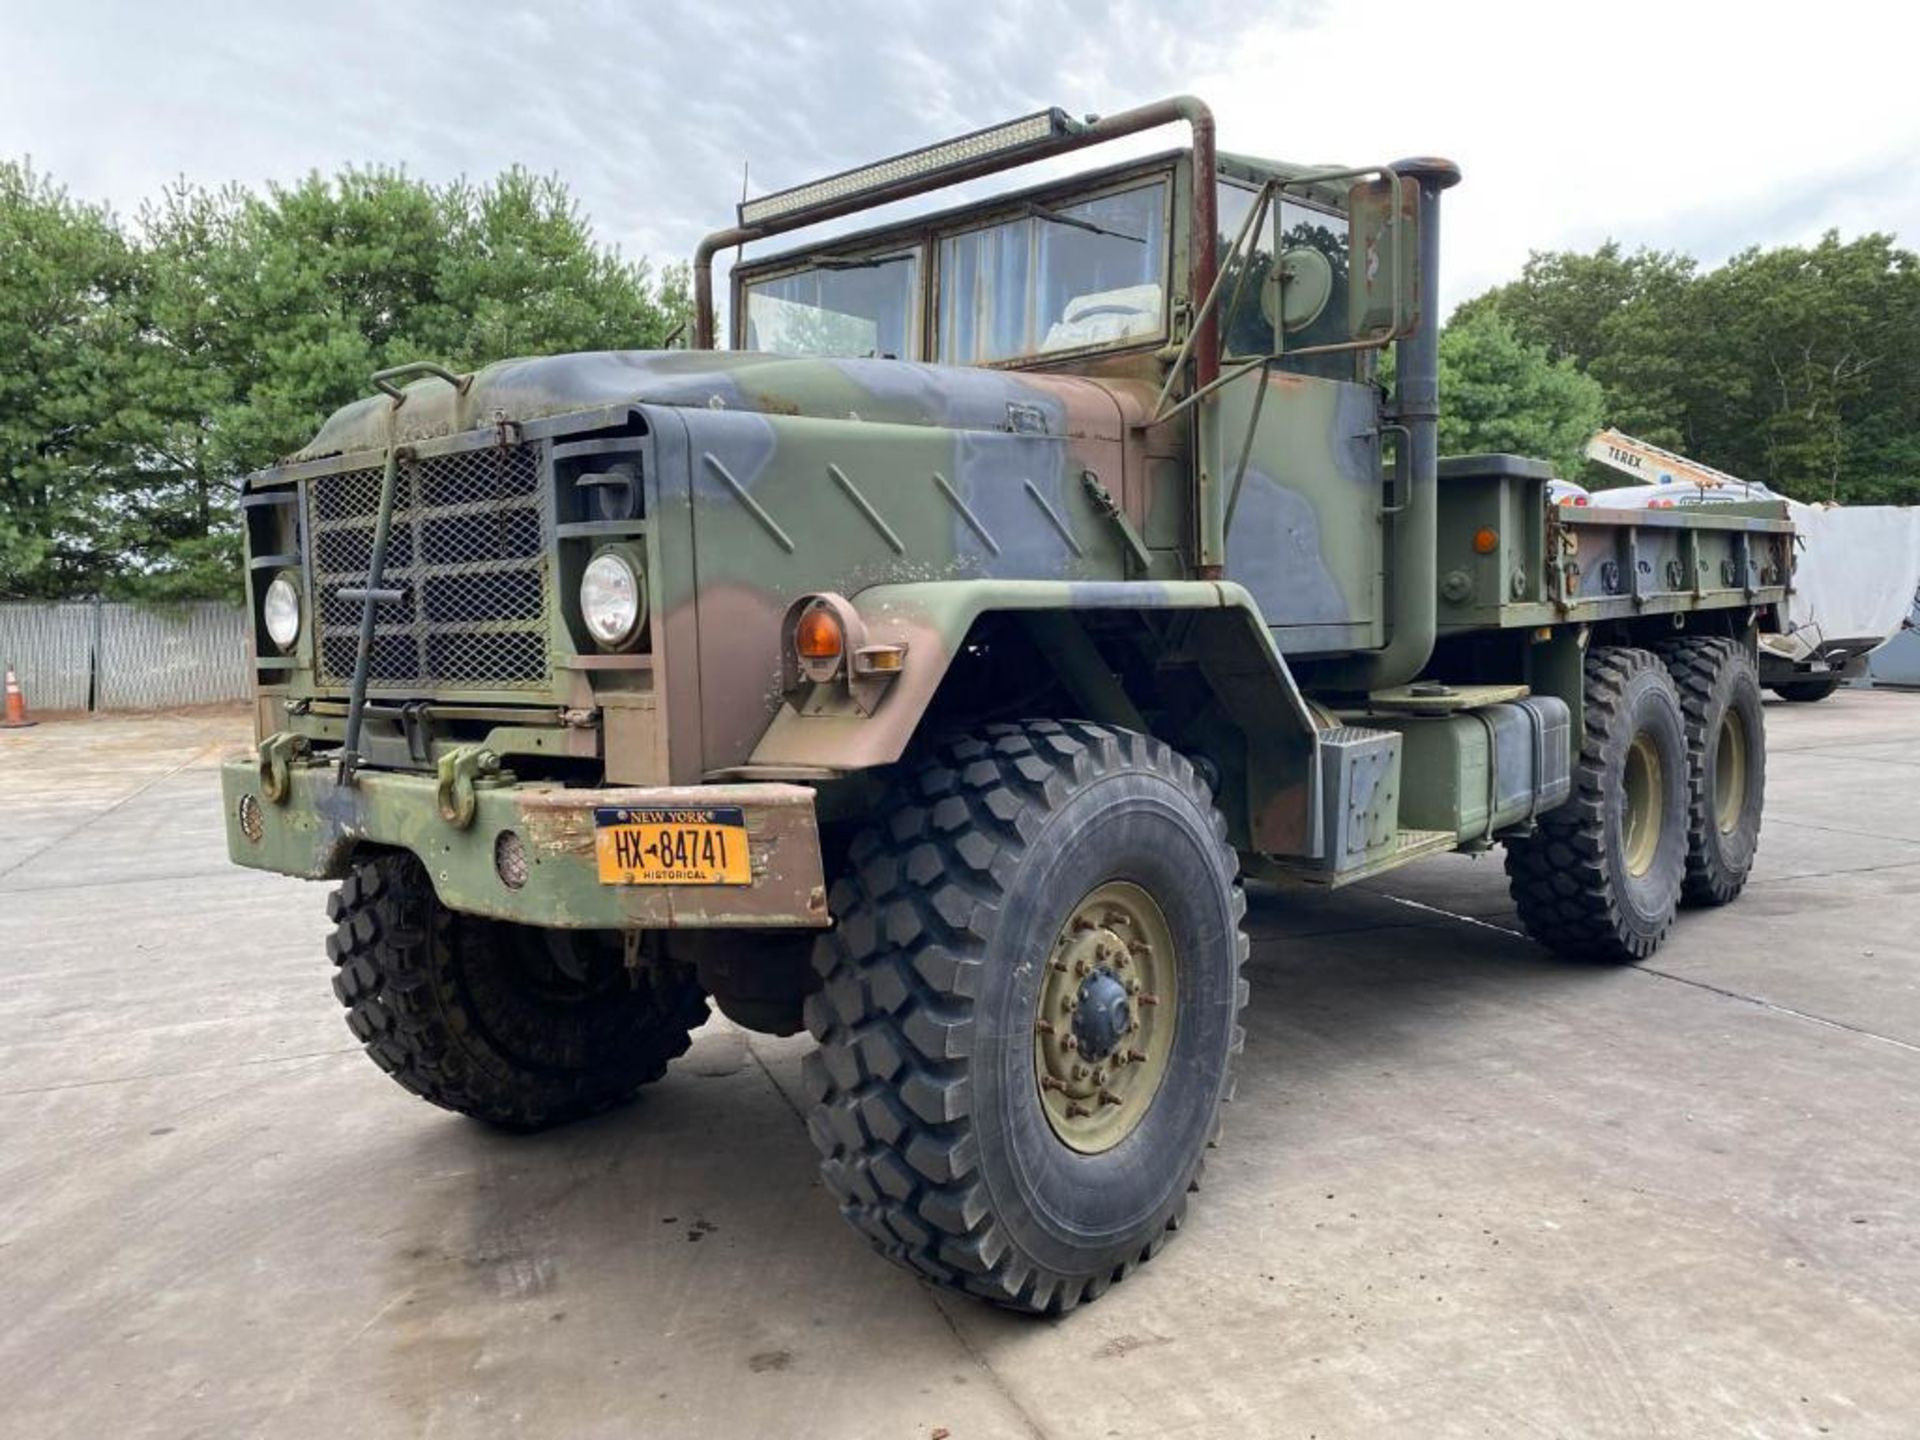 1985 AM GENERAL 2-1/2-Ton 6X6 Military Vehicle - Image 25 of 56